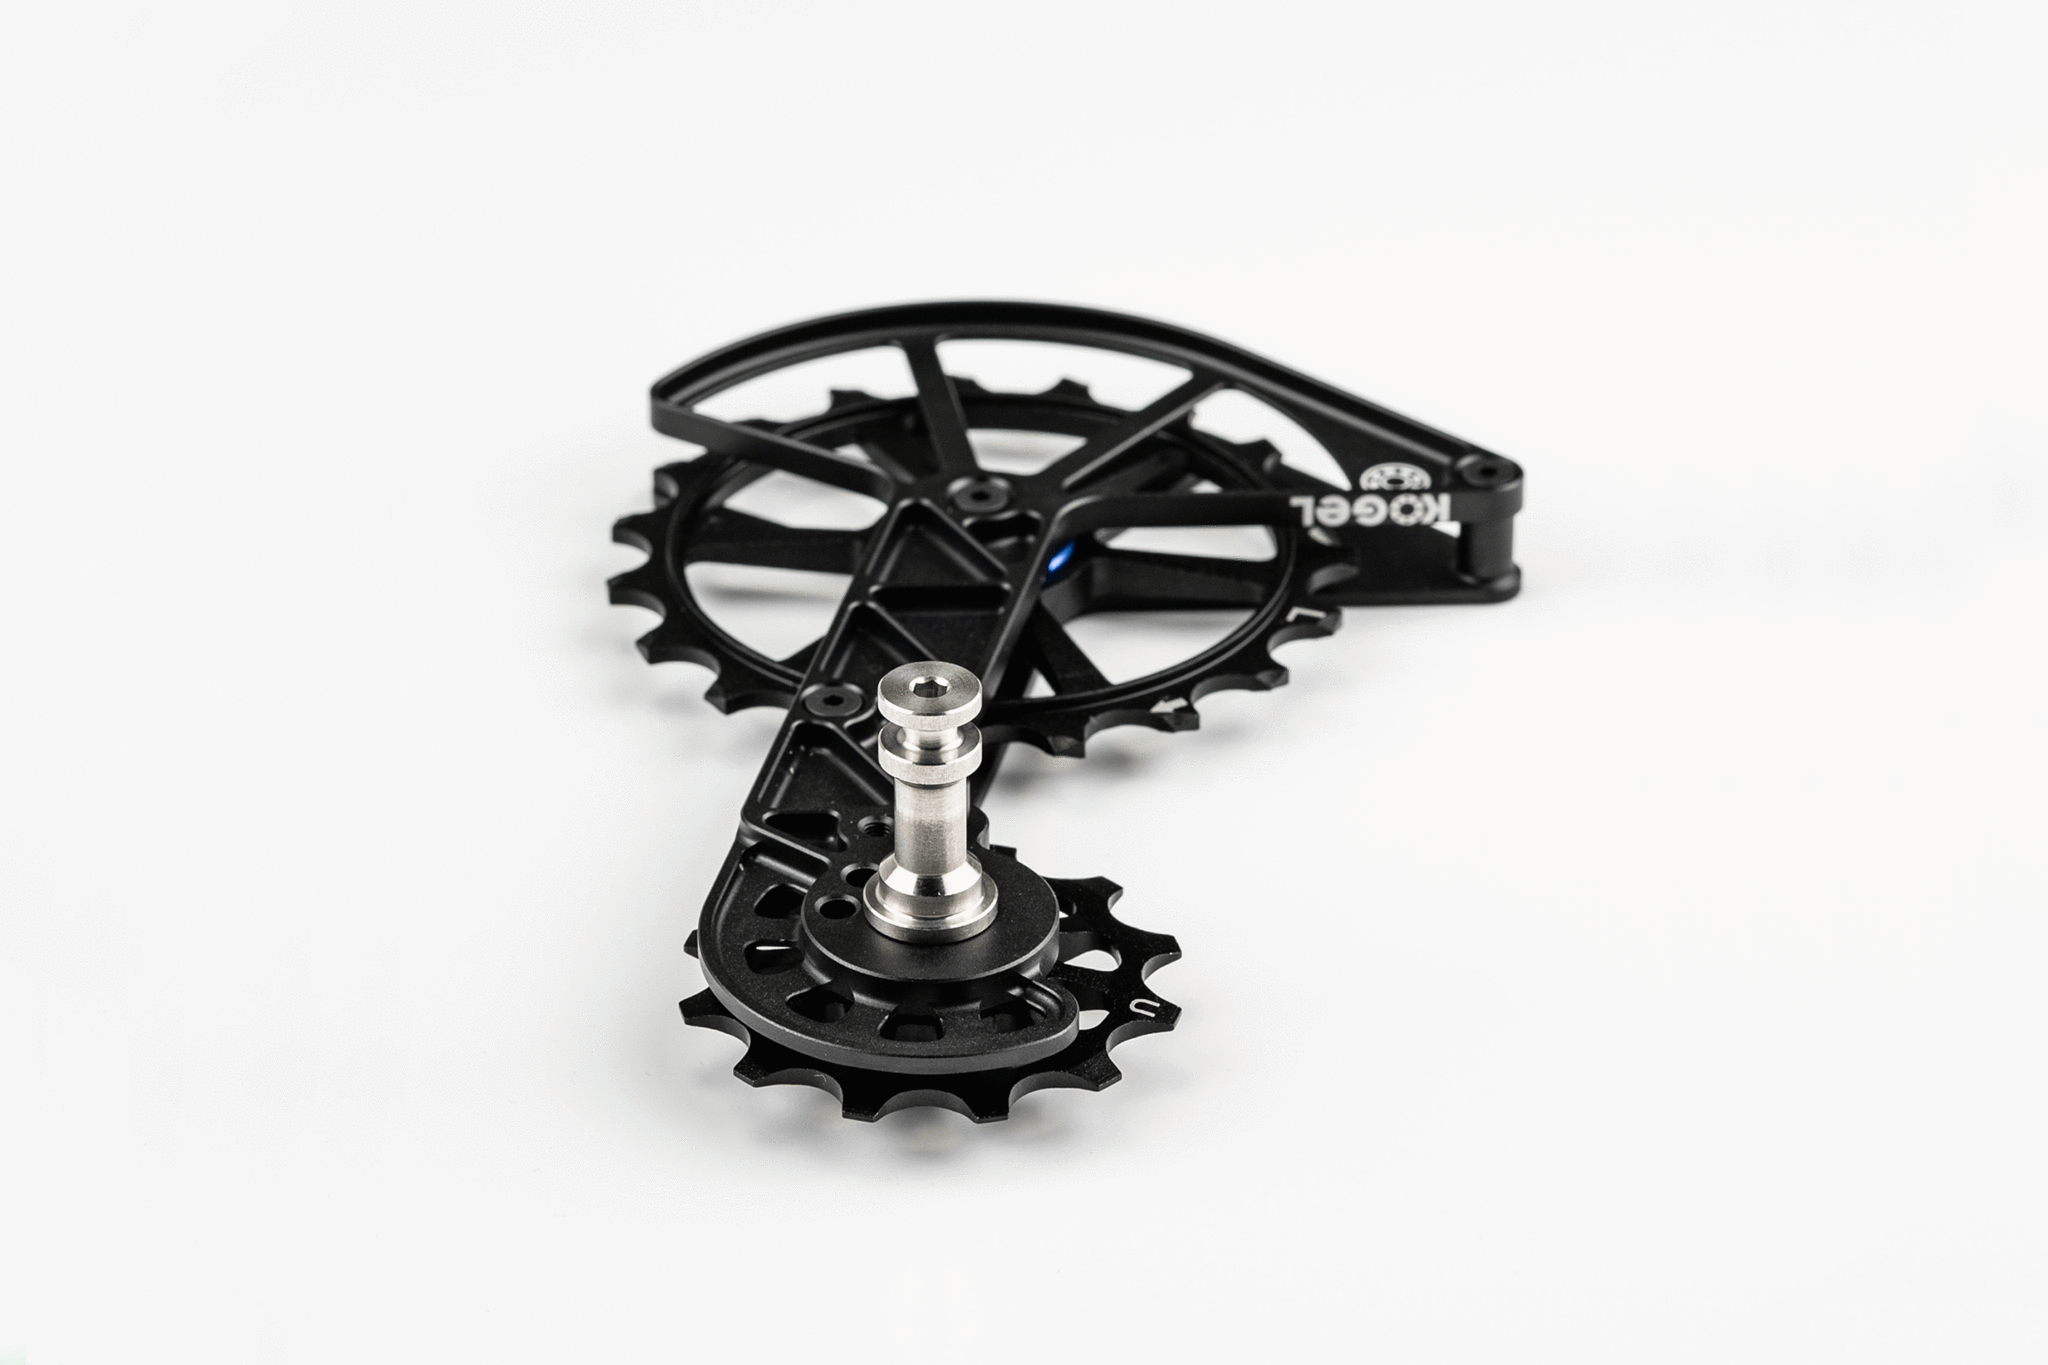 Kolossos Oversized Derailleur Cage for Shimano Dura Ace R9100 and Ultegra R8000